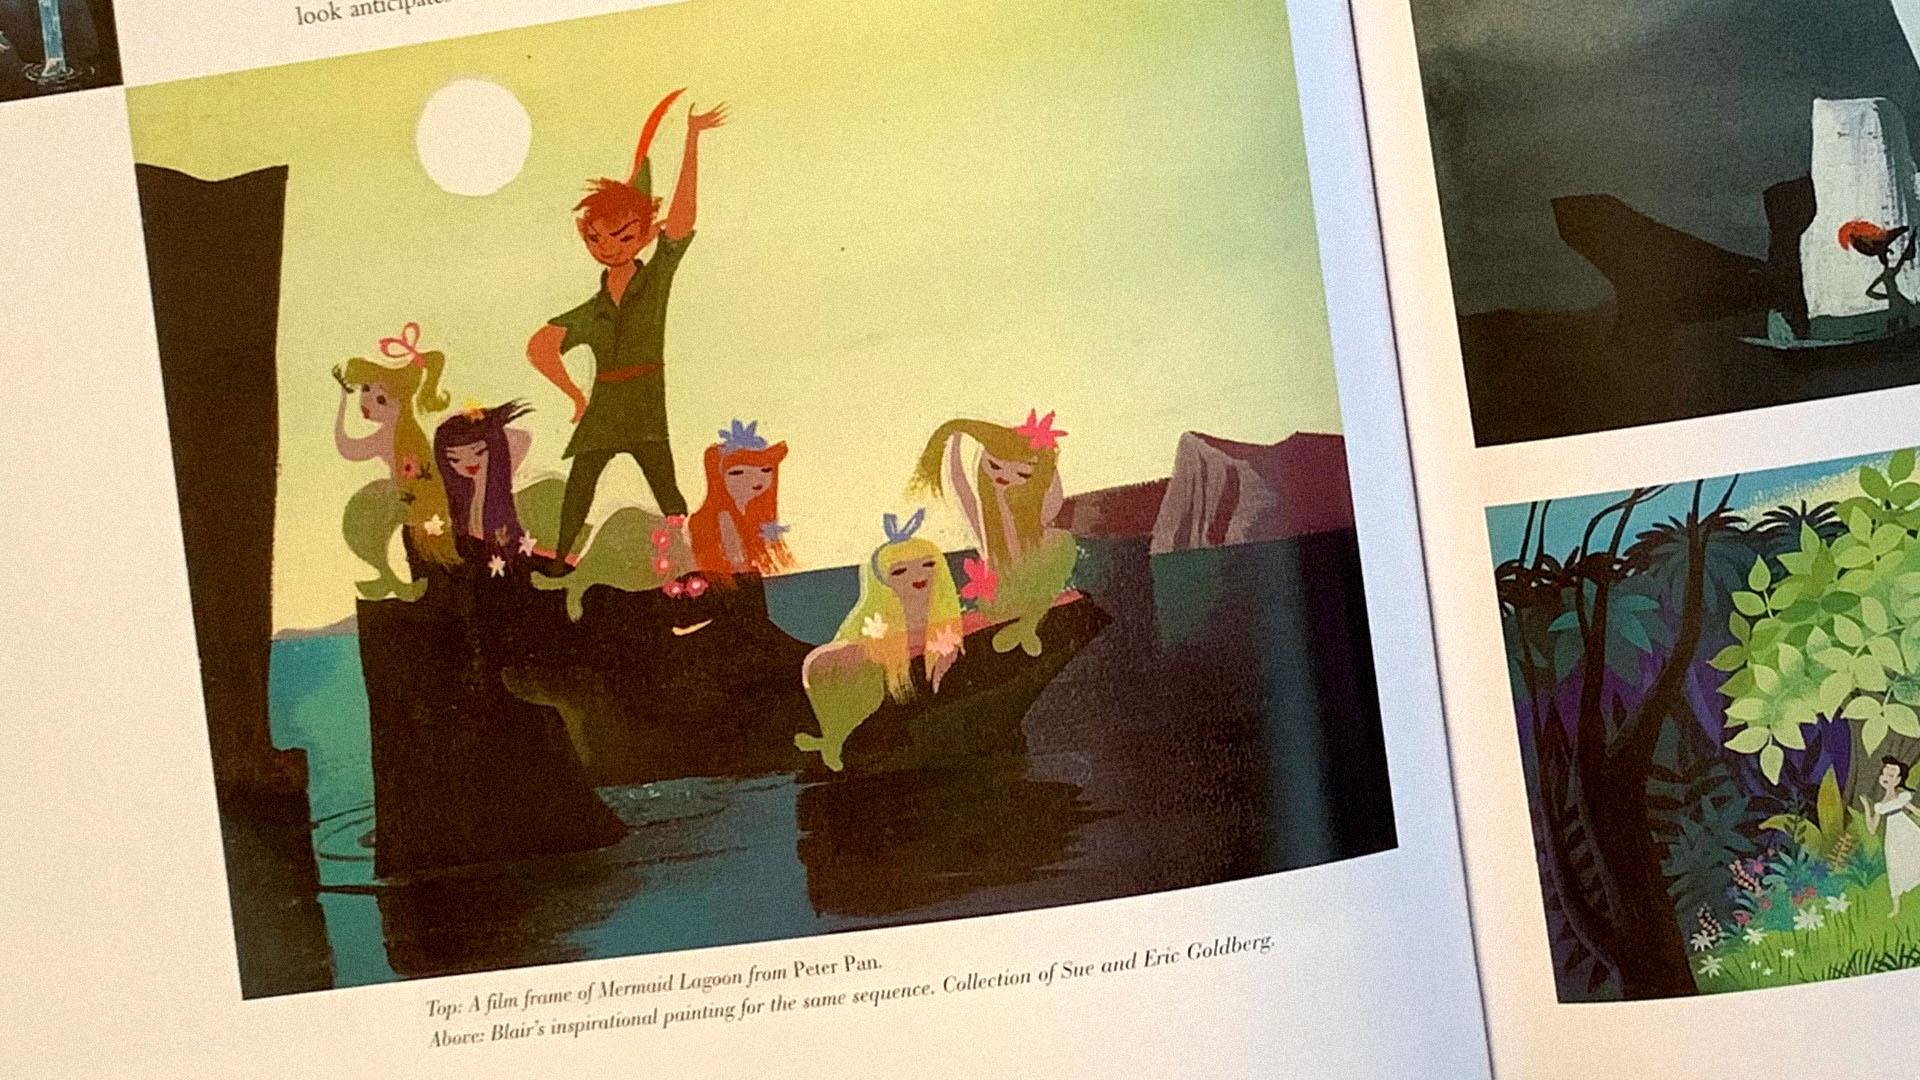 Here we see an inspirational painting by Disney artist Mary Blair that shows Peter Pan on a rock surrounded by mermaids. The image is printed in 'The Art And Flair Of Mary Blair' by John Canemaker.